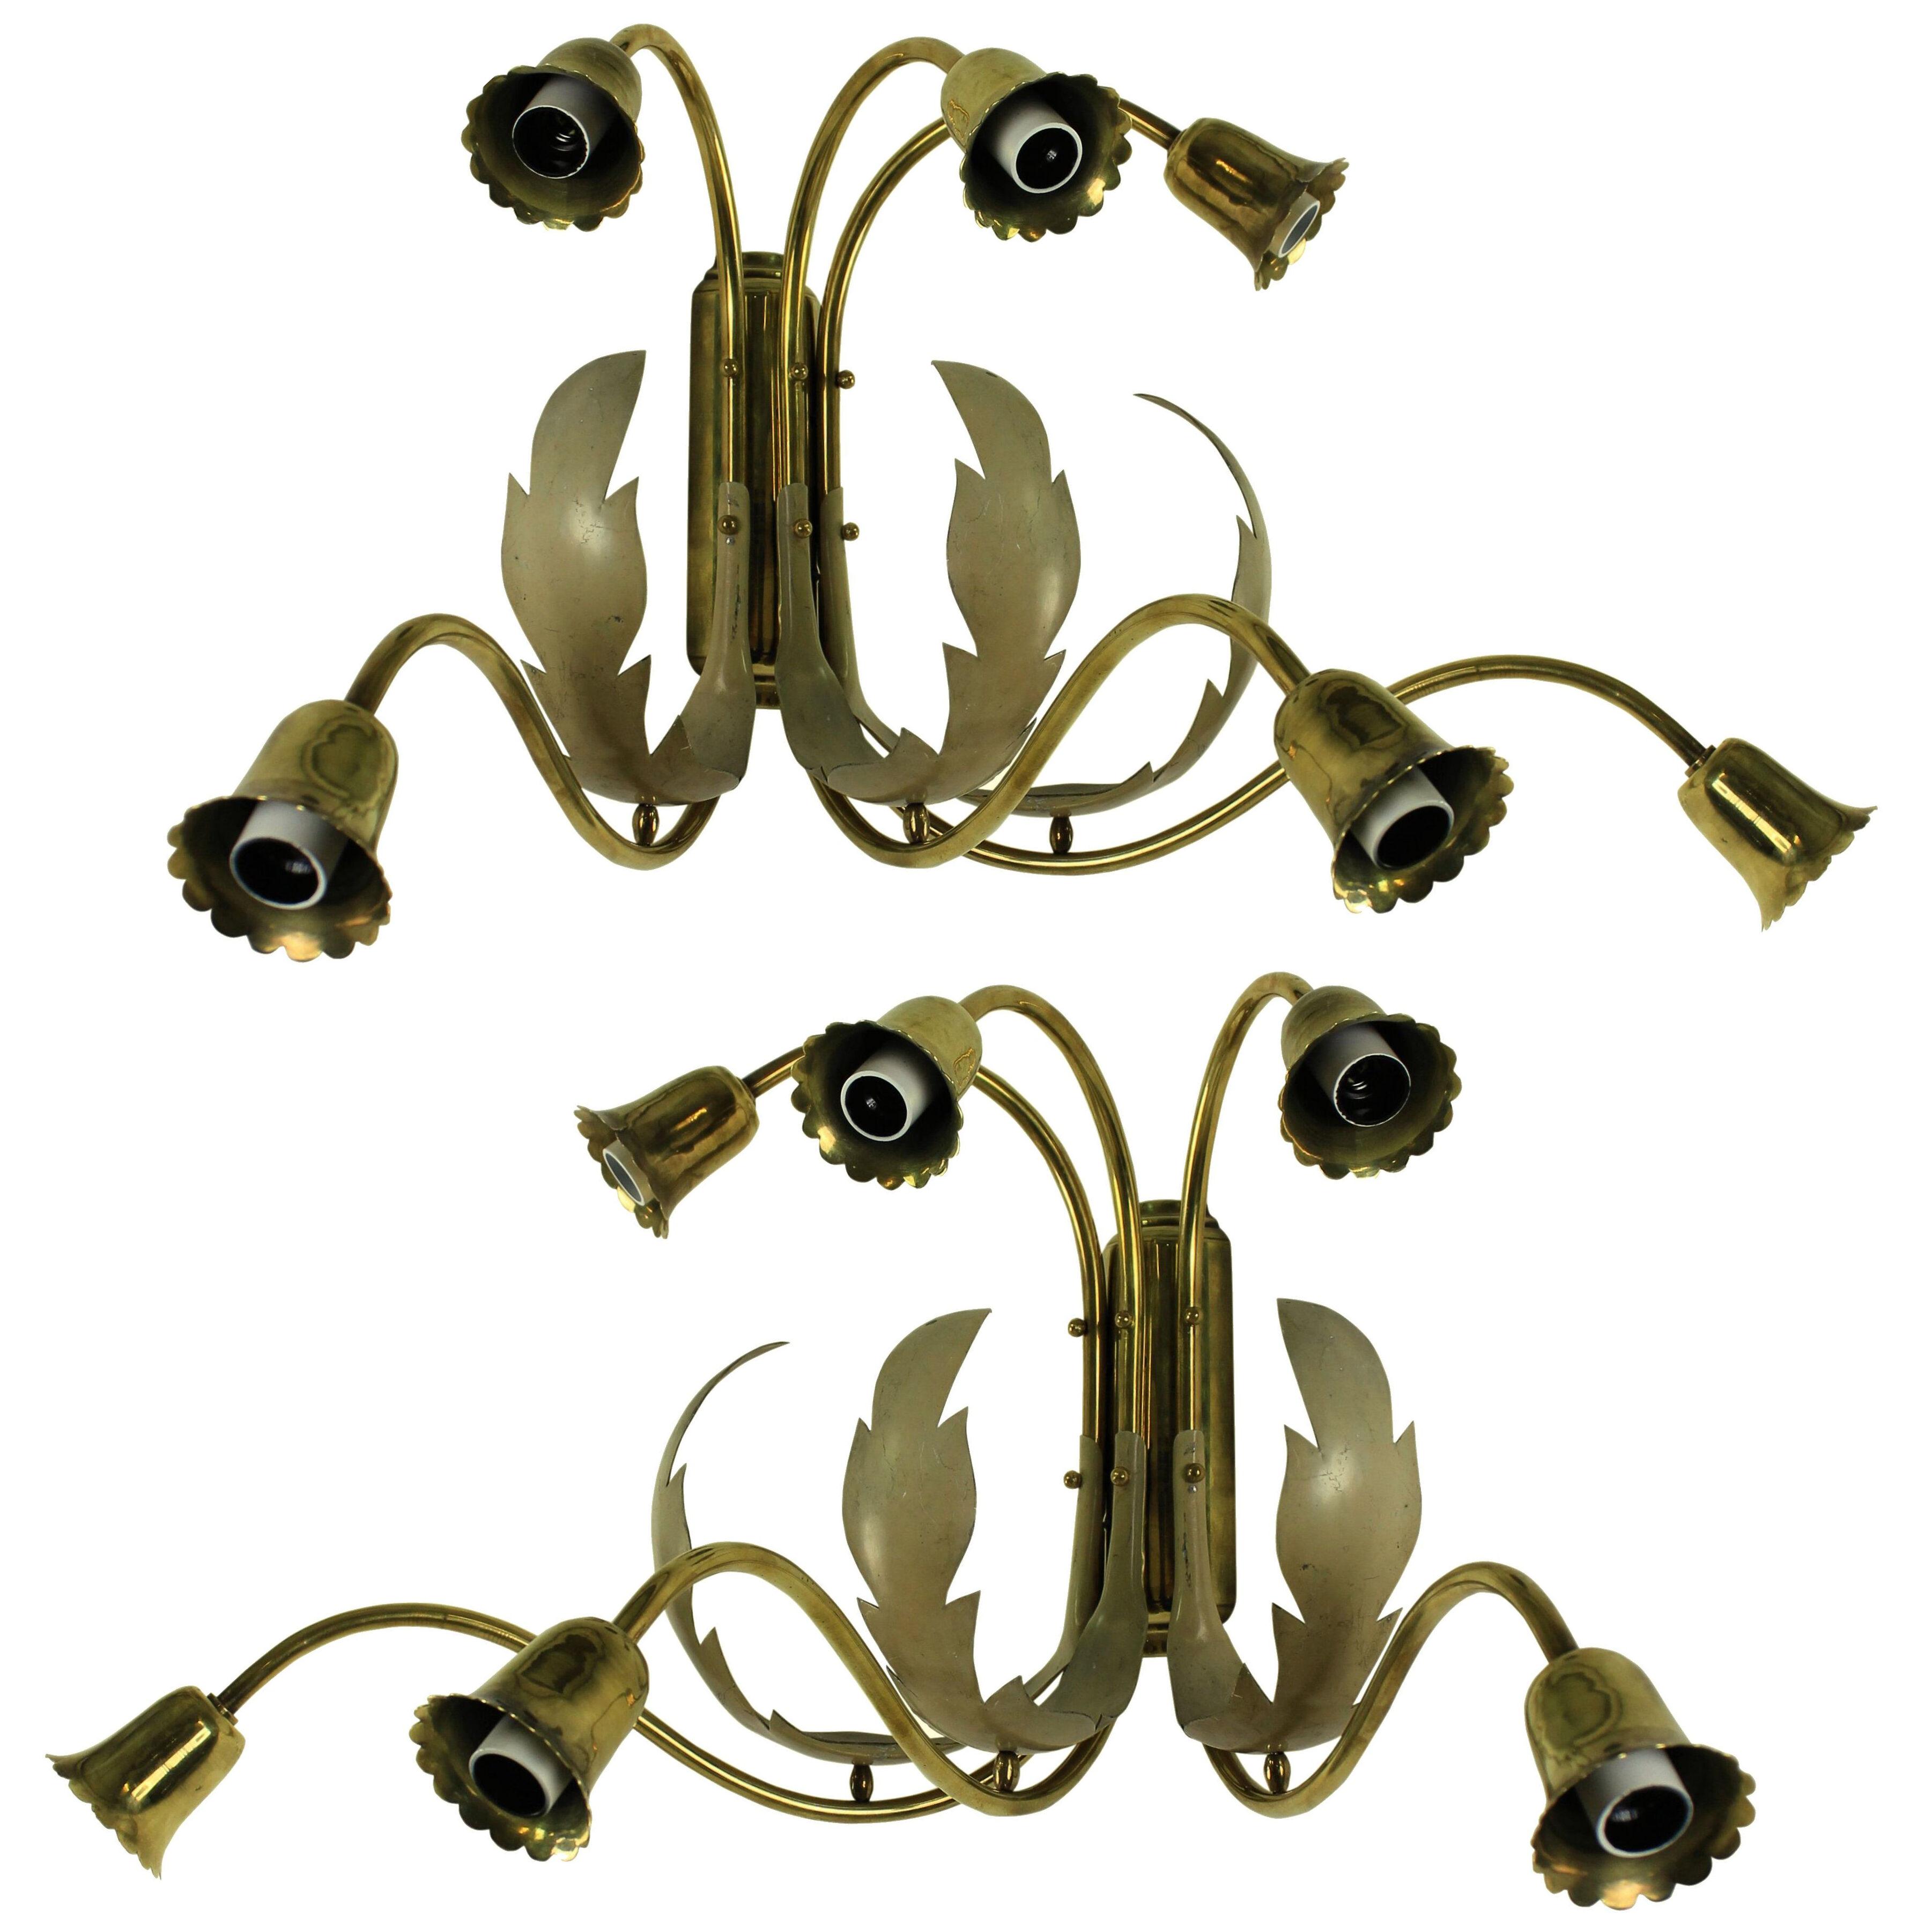 A PAIR OF LARGE MID-CENTURY ITALIAN SCONCES